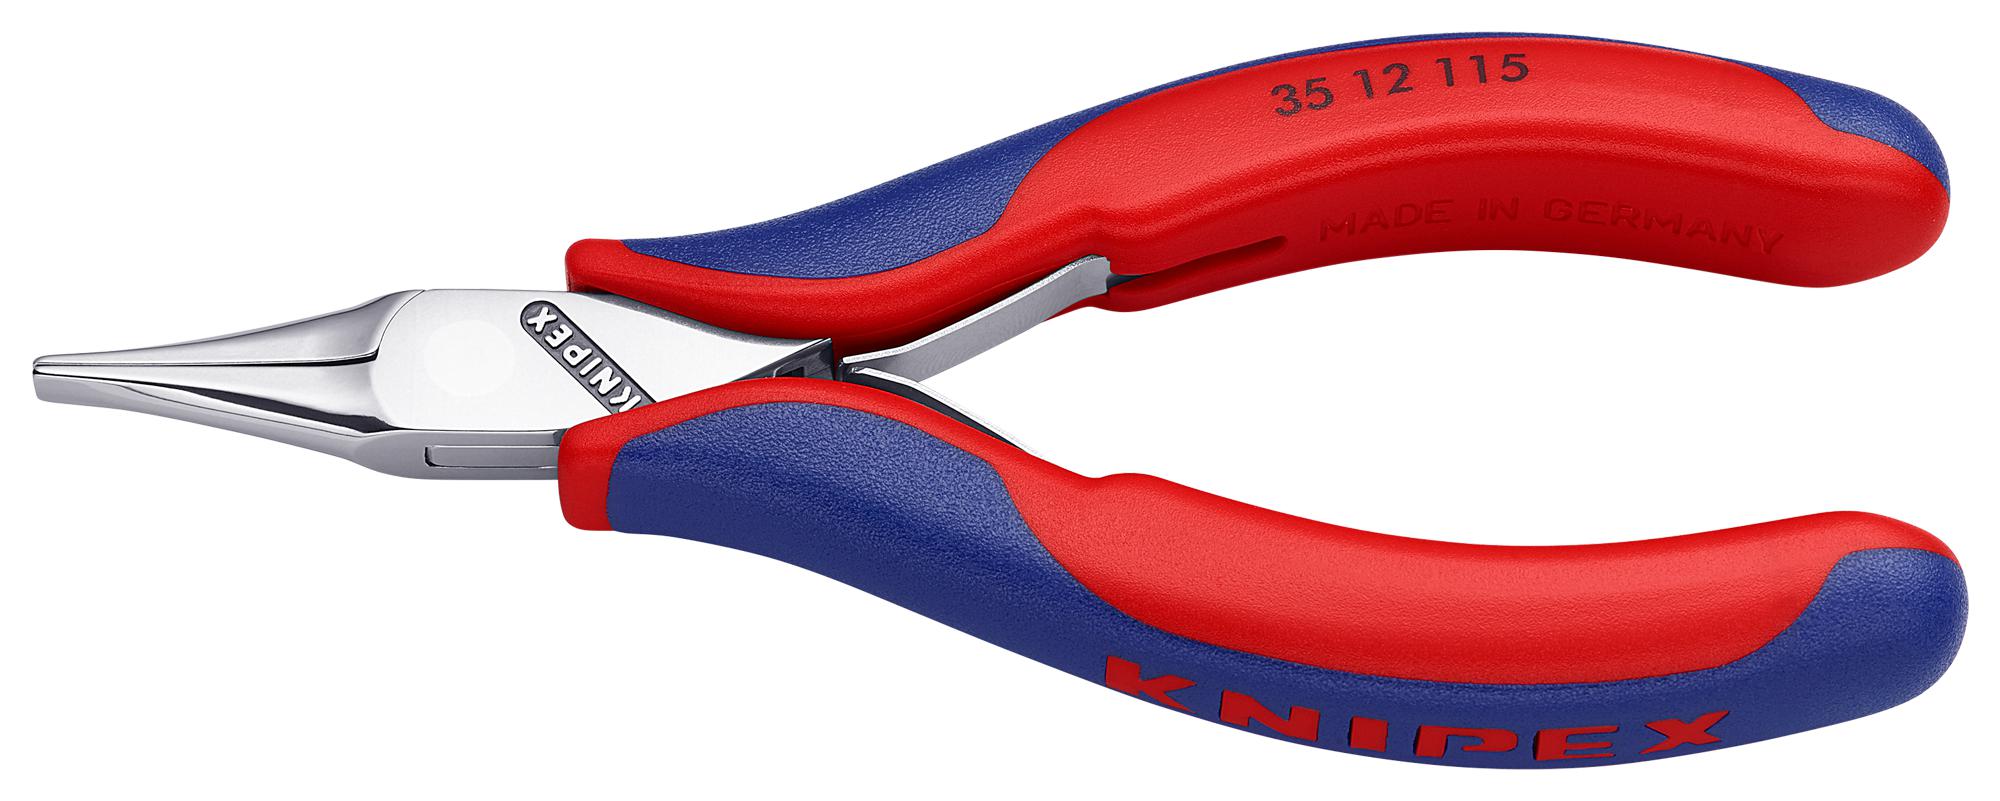 Knipex 35 12 115 Relay Adjusting Pliers